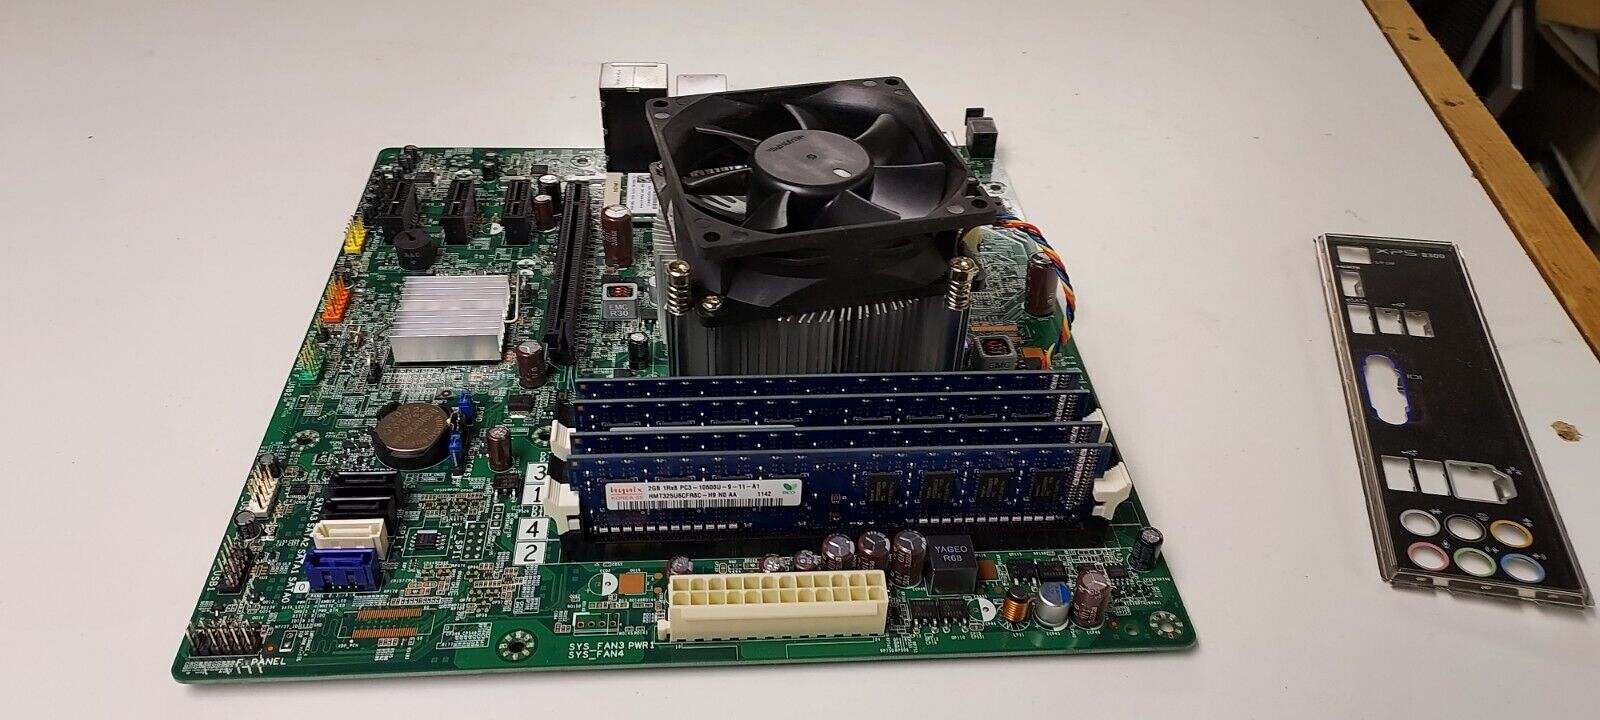 Motherboard From Dell XPS 8300 with 3.0 GHz Intel Core i5-2320 8 GB RAM